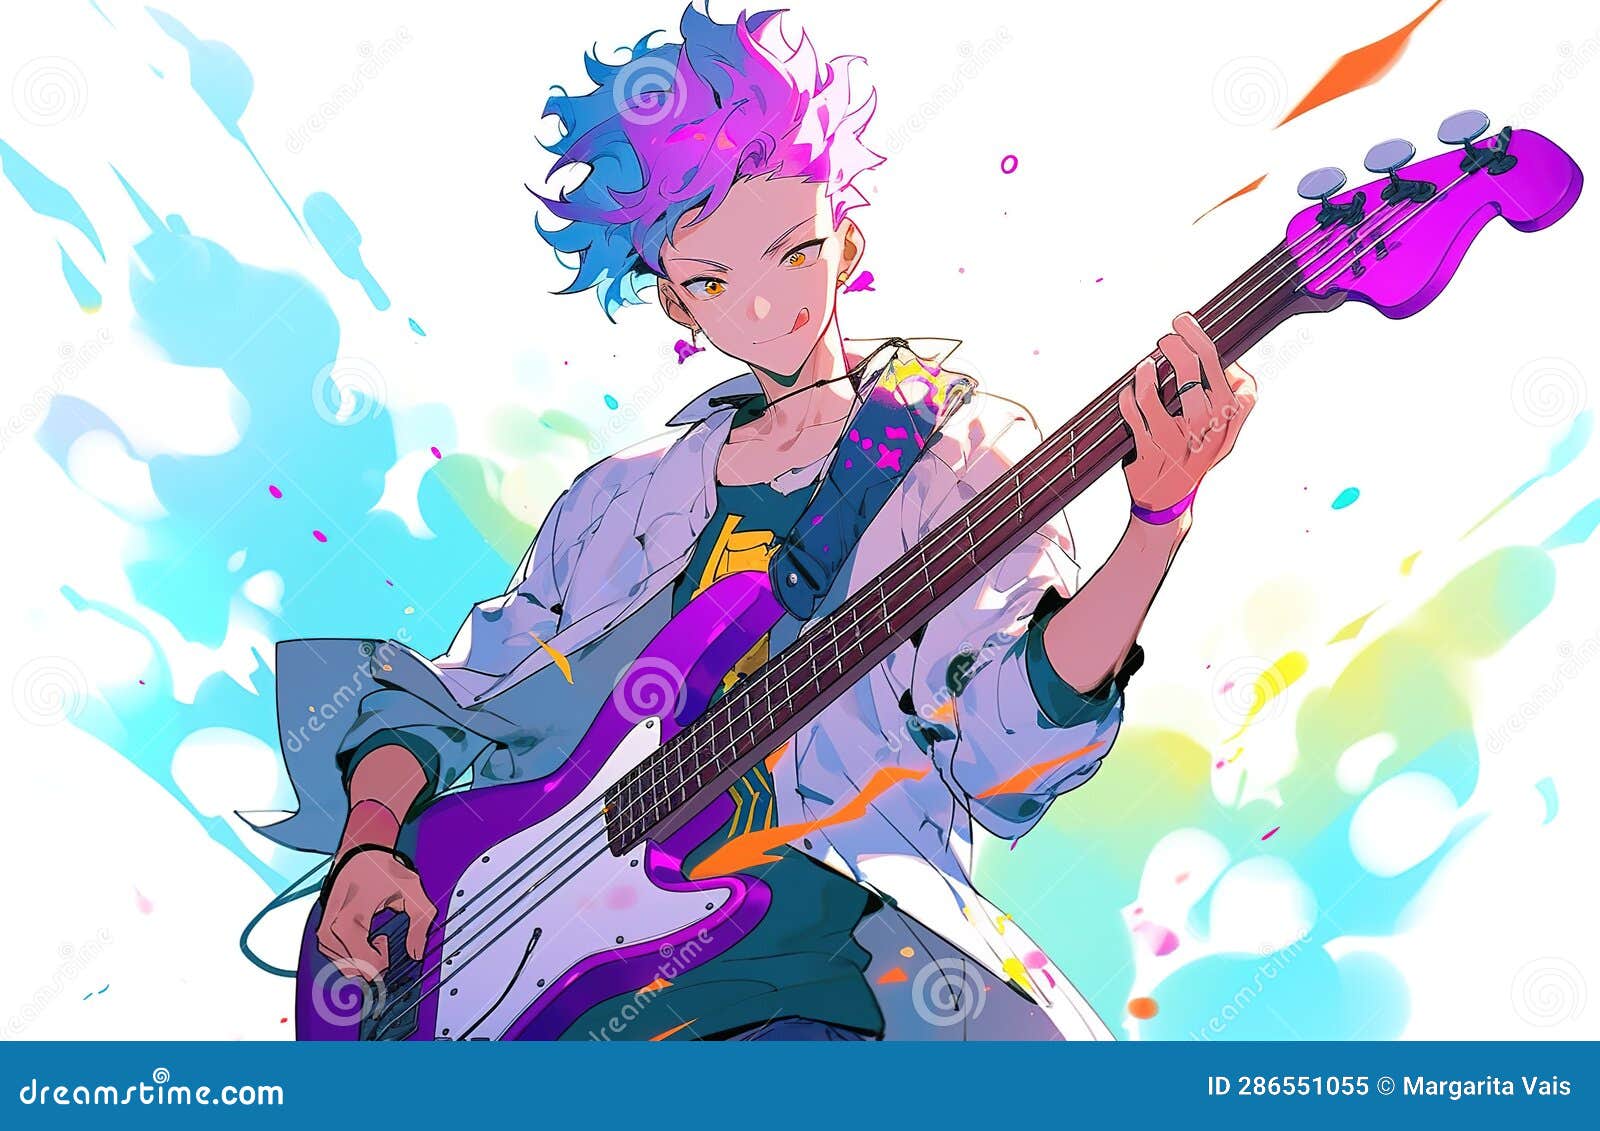 Discover 69+ anime bassist latest - awesomeenglish.edu.vn